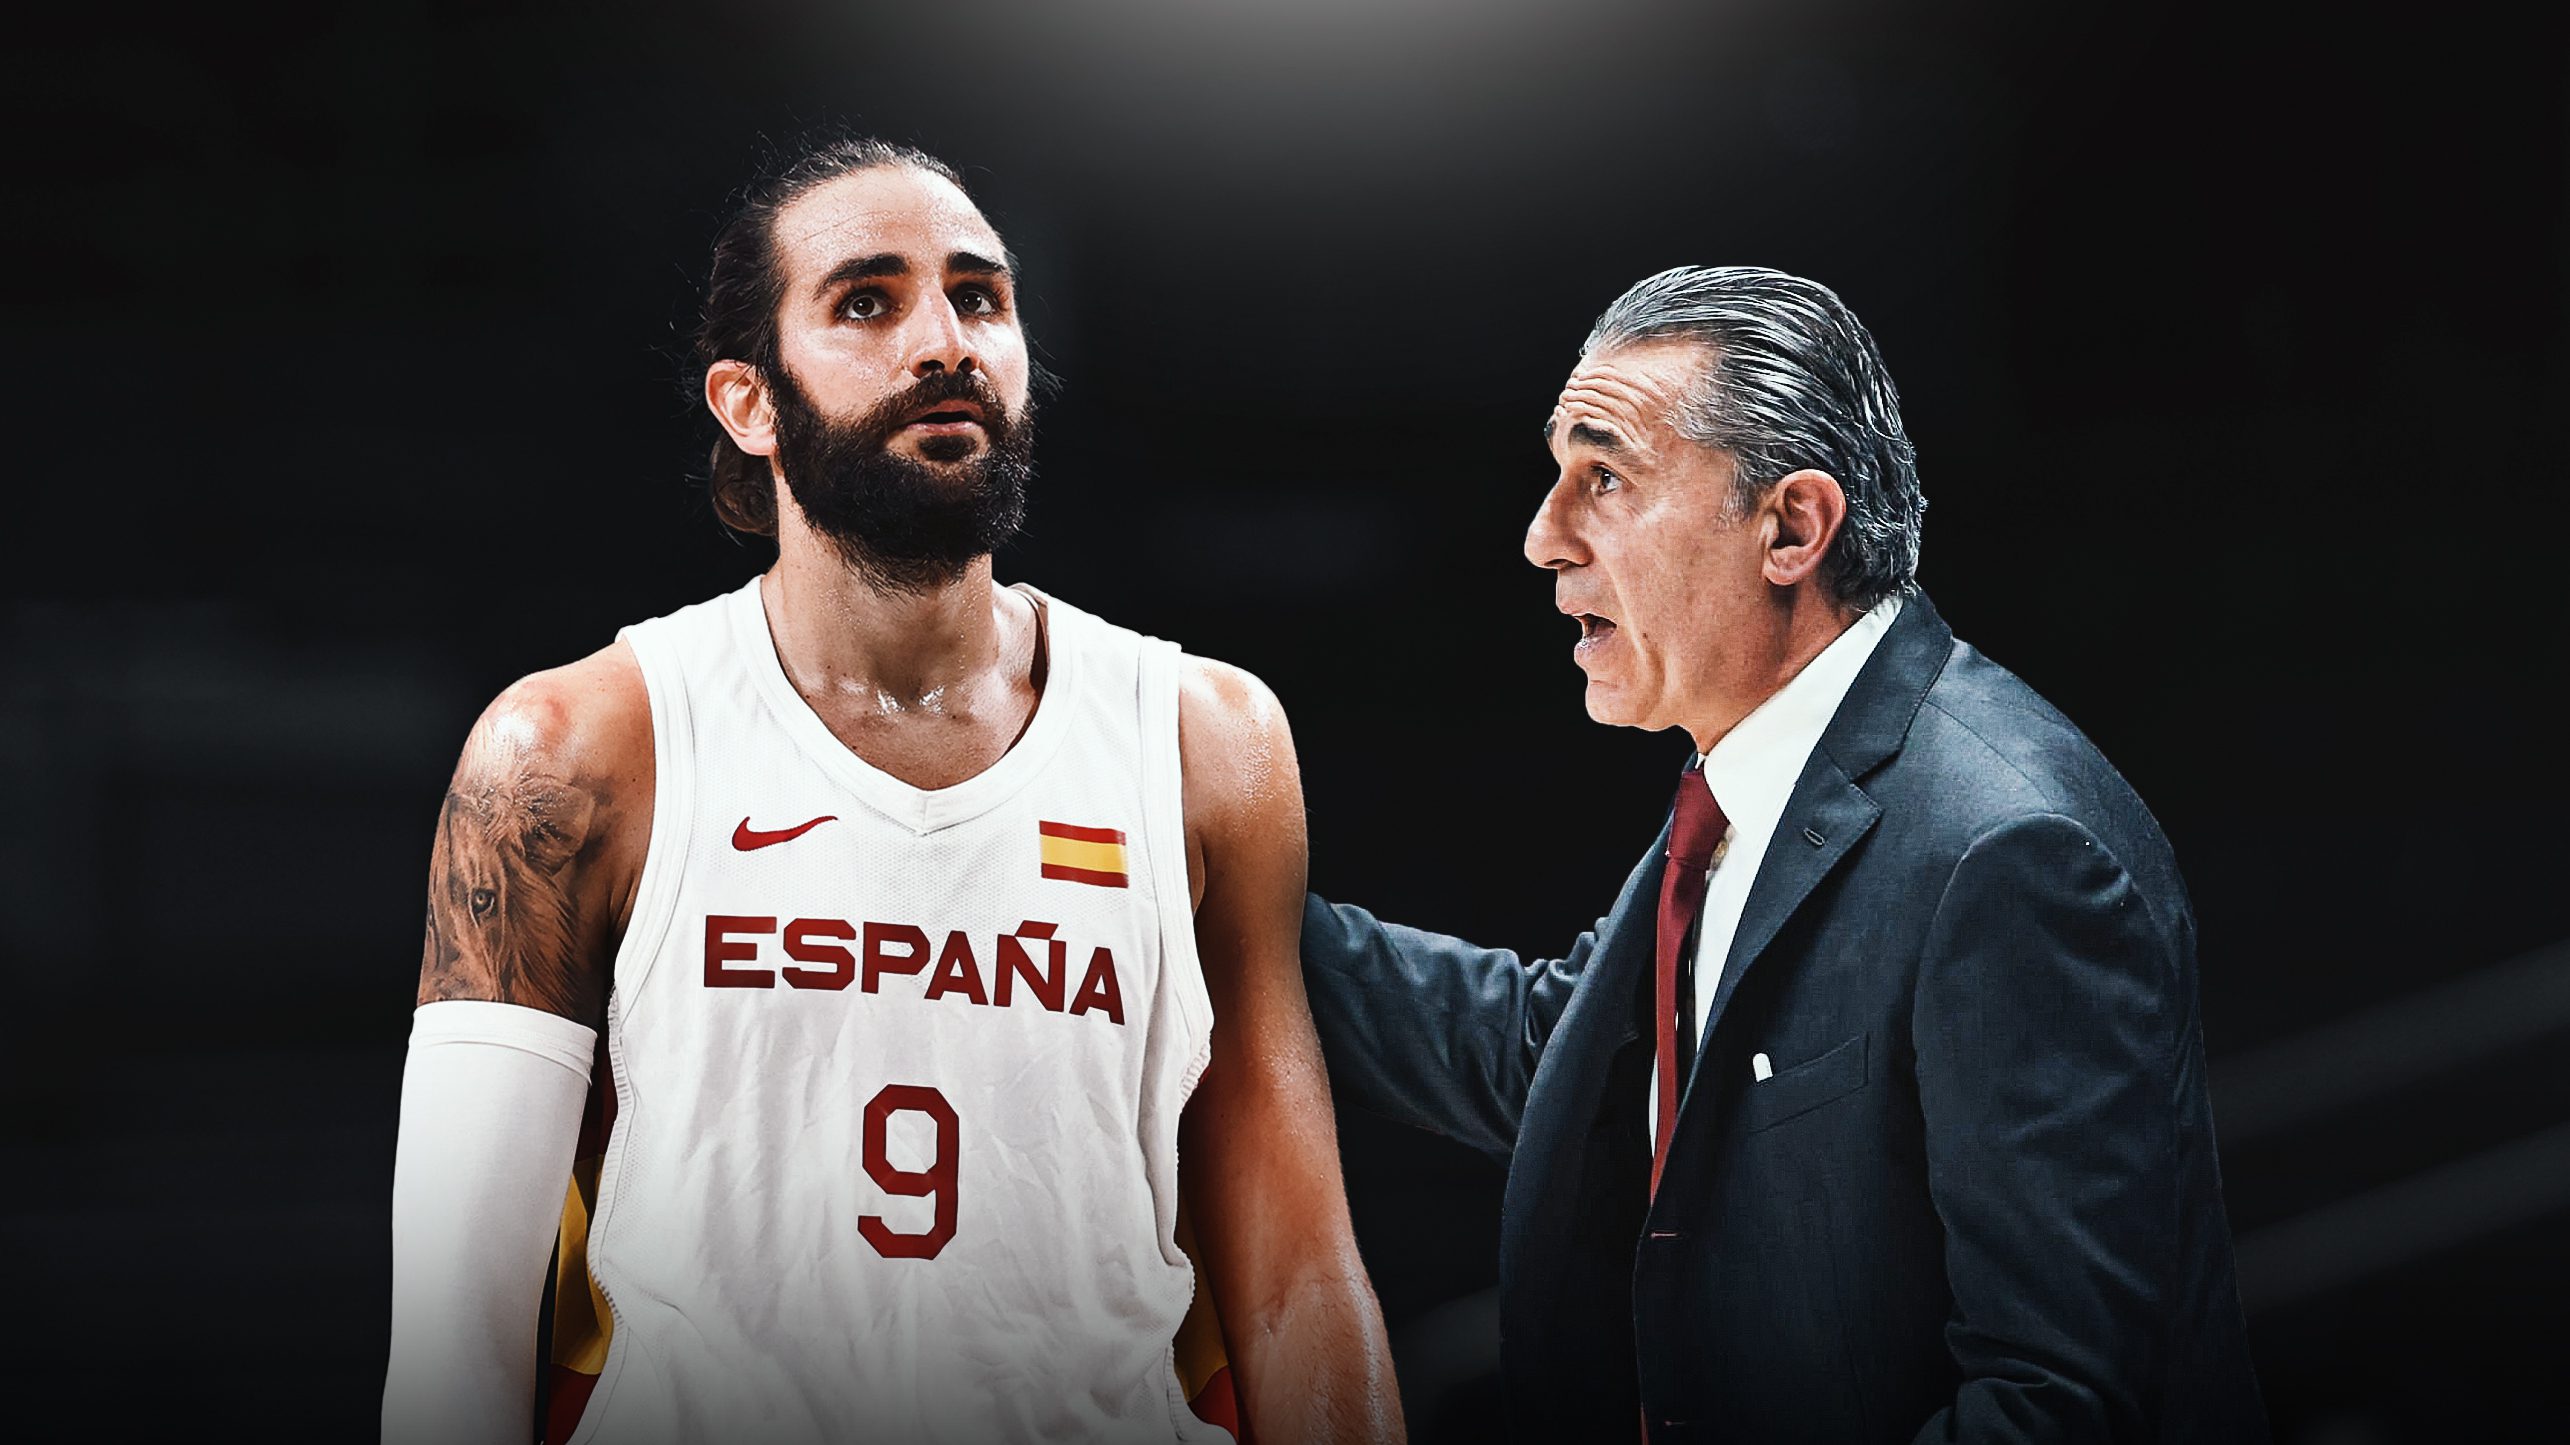 Spain Coach Opens Up on Loss of Ricky Rubio Ahead of FIBA World Cup